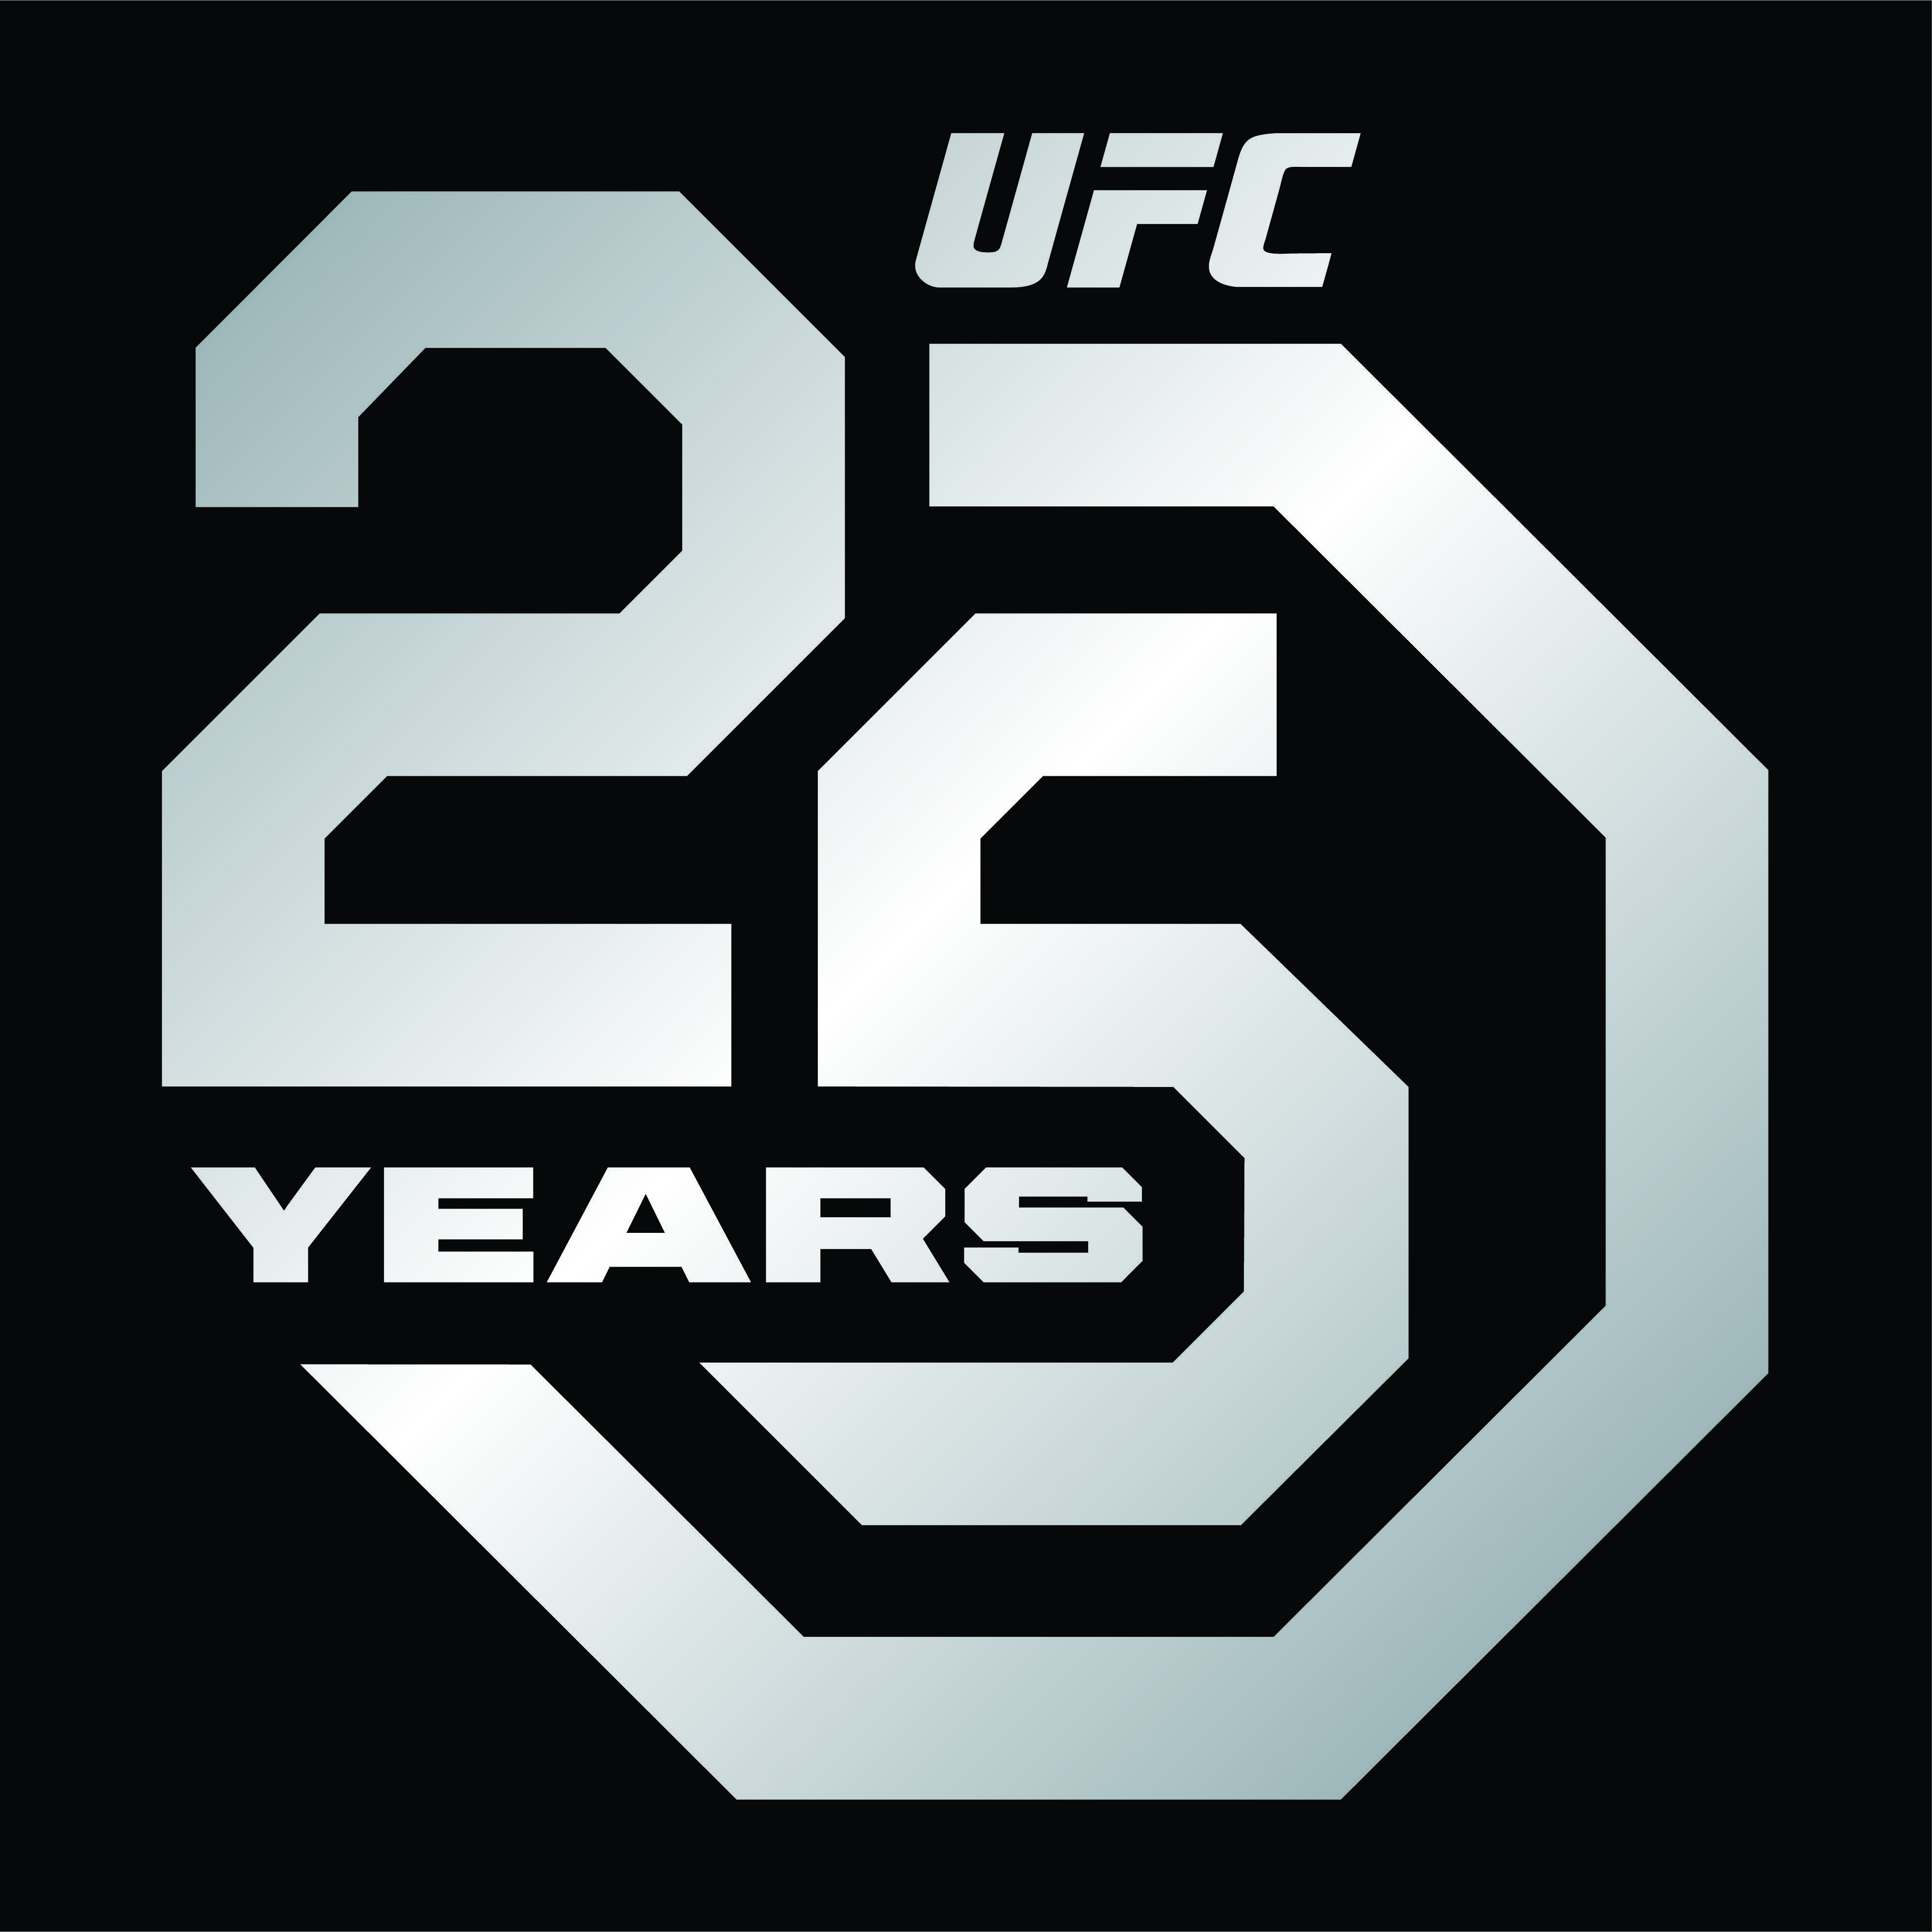 Year 2018 Logo - UFC Unveils 25 Year Anniversary Logo For 2018 Campaign